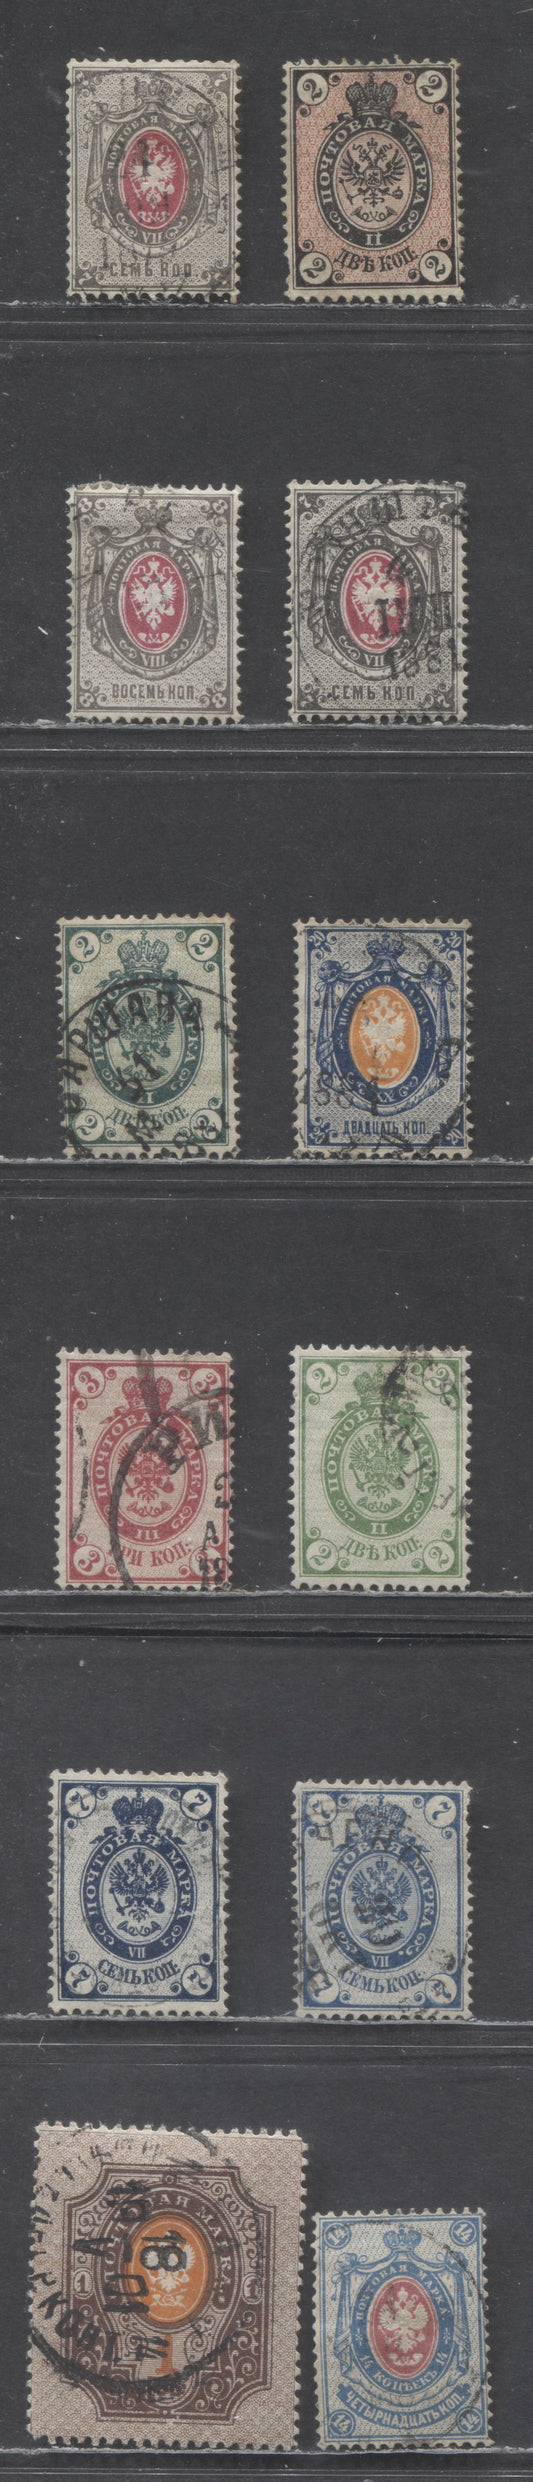 Lot 95 Russia SG#26/45 1875-1889 Arms Issue, On Horizontal Wove Papers, Includes 2 Shades Of 7k Blue & 7k Gray & Rose/Carmine, 12 Fine/Very Fine Used Singles, Click on Listing to See ALL Pictures, Estimated Value $25